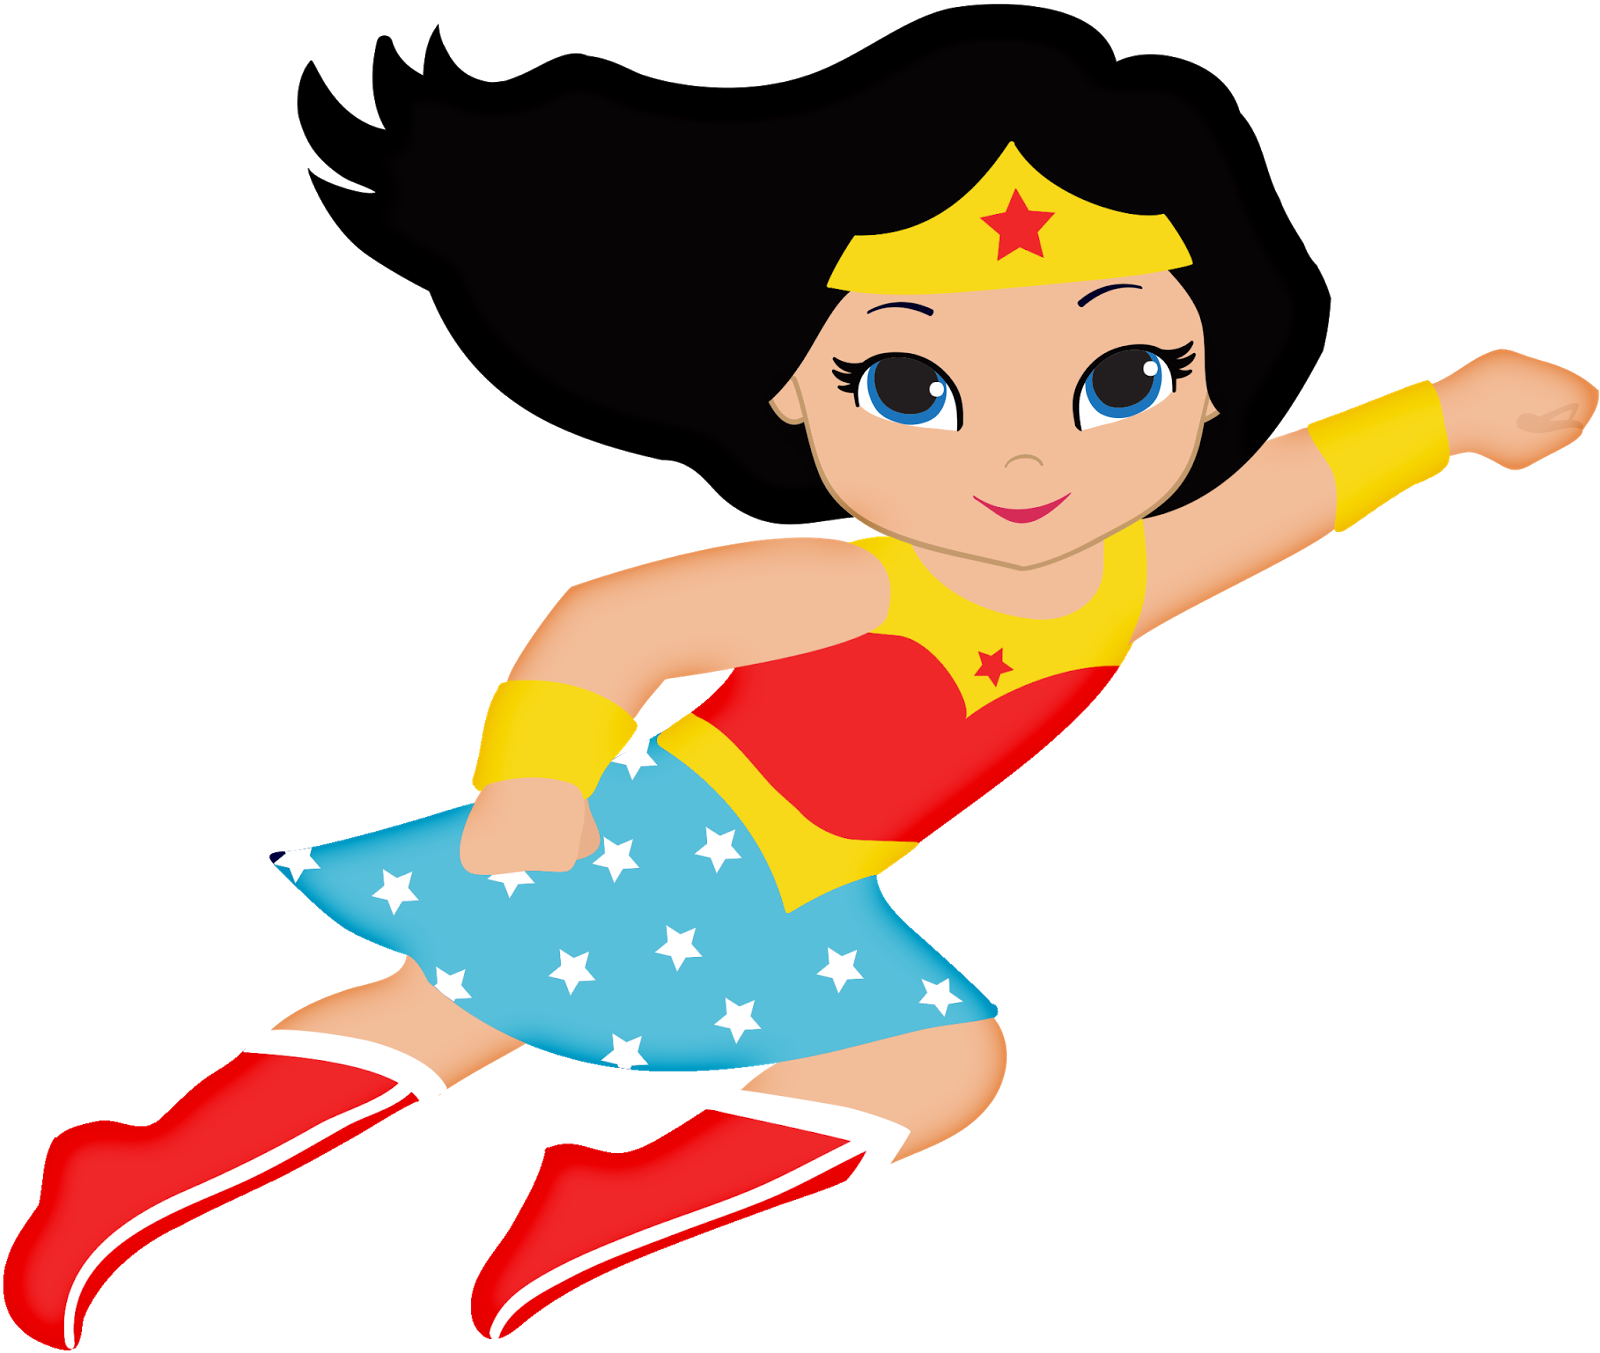 Tall clipart alto. Wonder woman baby oh